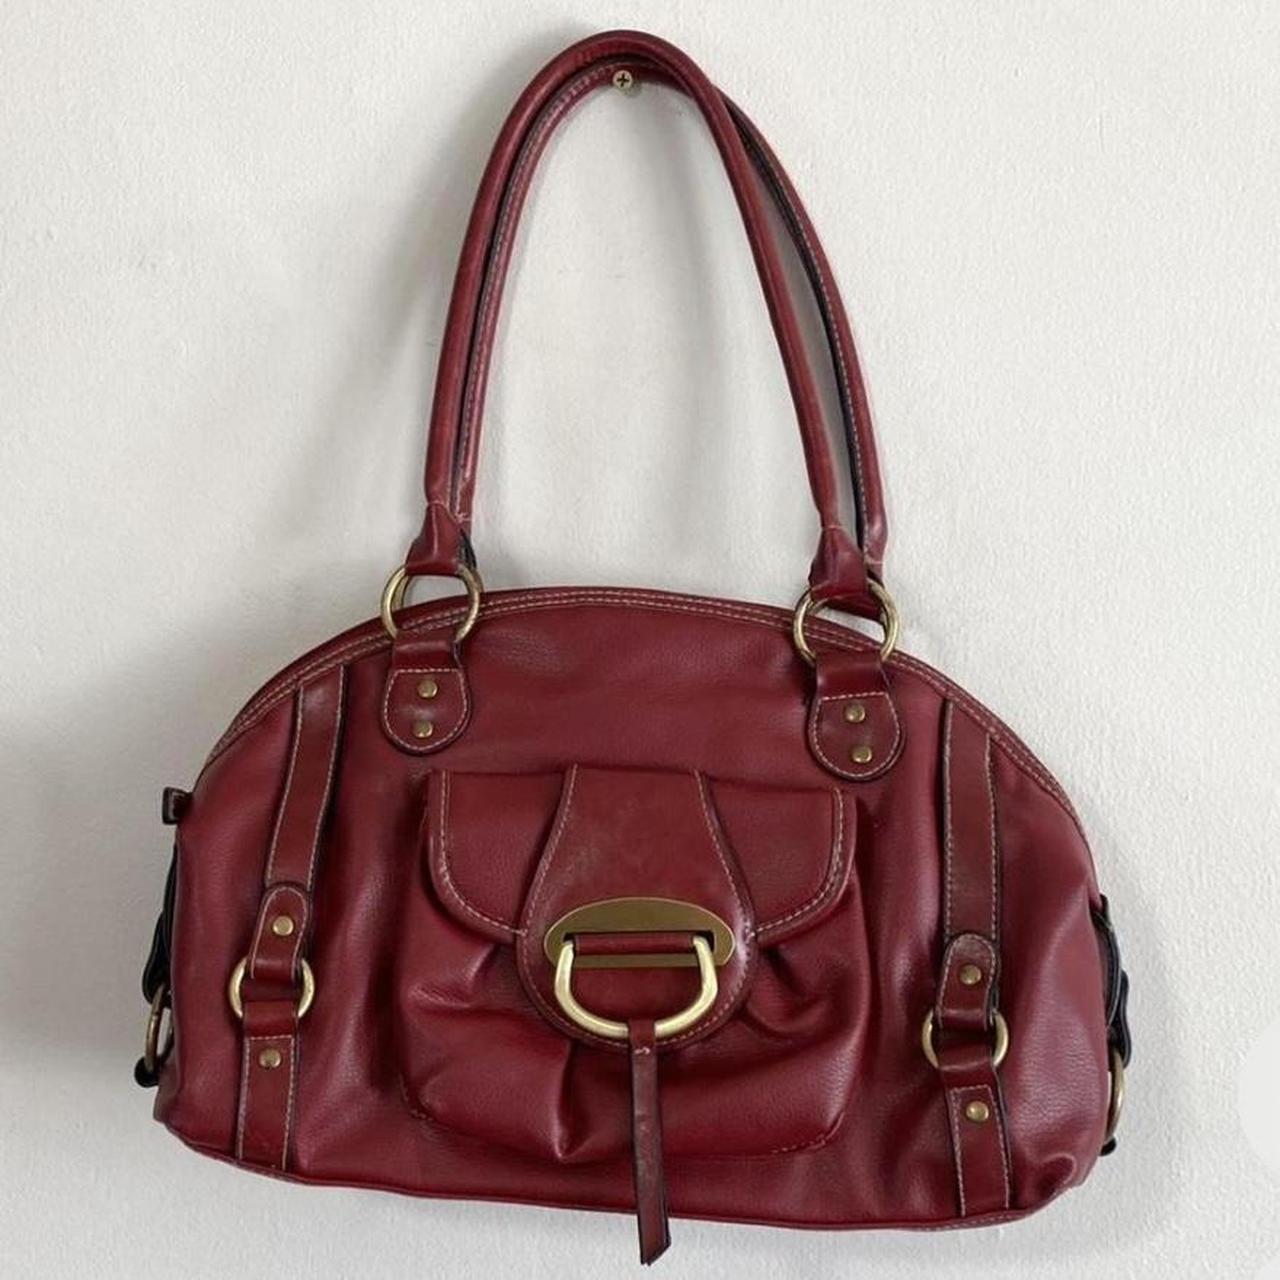 Shoulder purse in cherry red faux leather with... - Depop